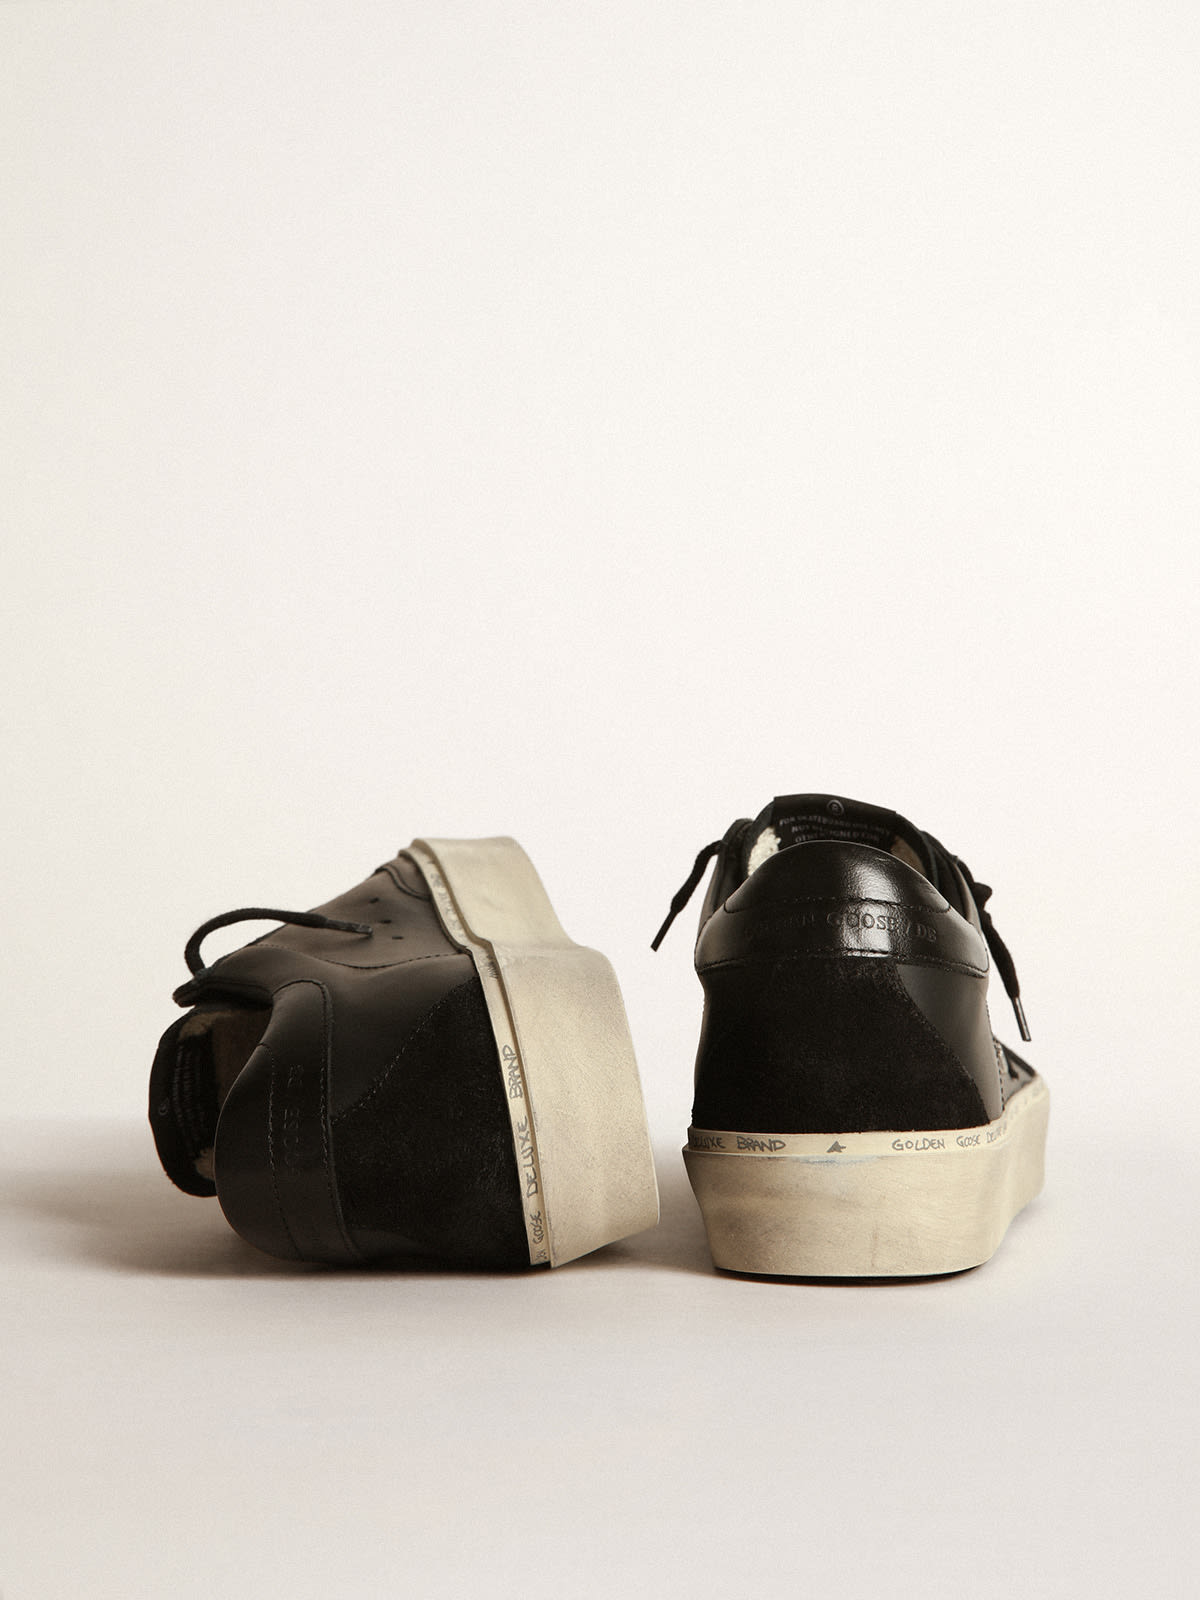 Golden Goose - Hi-Star sneakers in leather with studded GGDB lettering in 